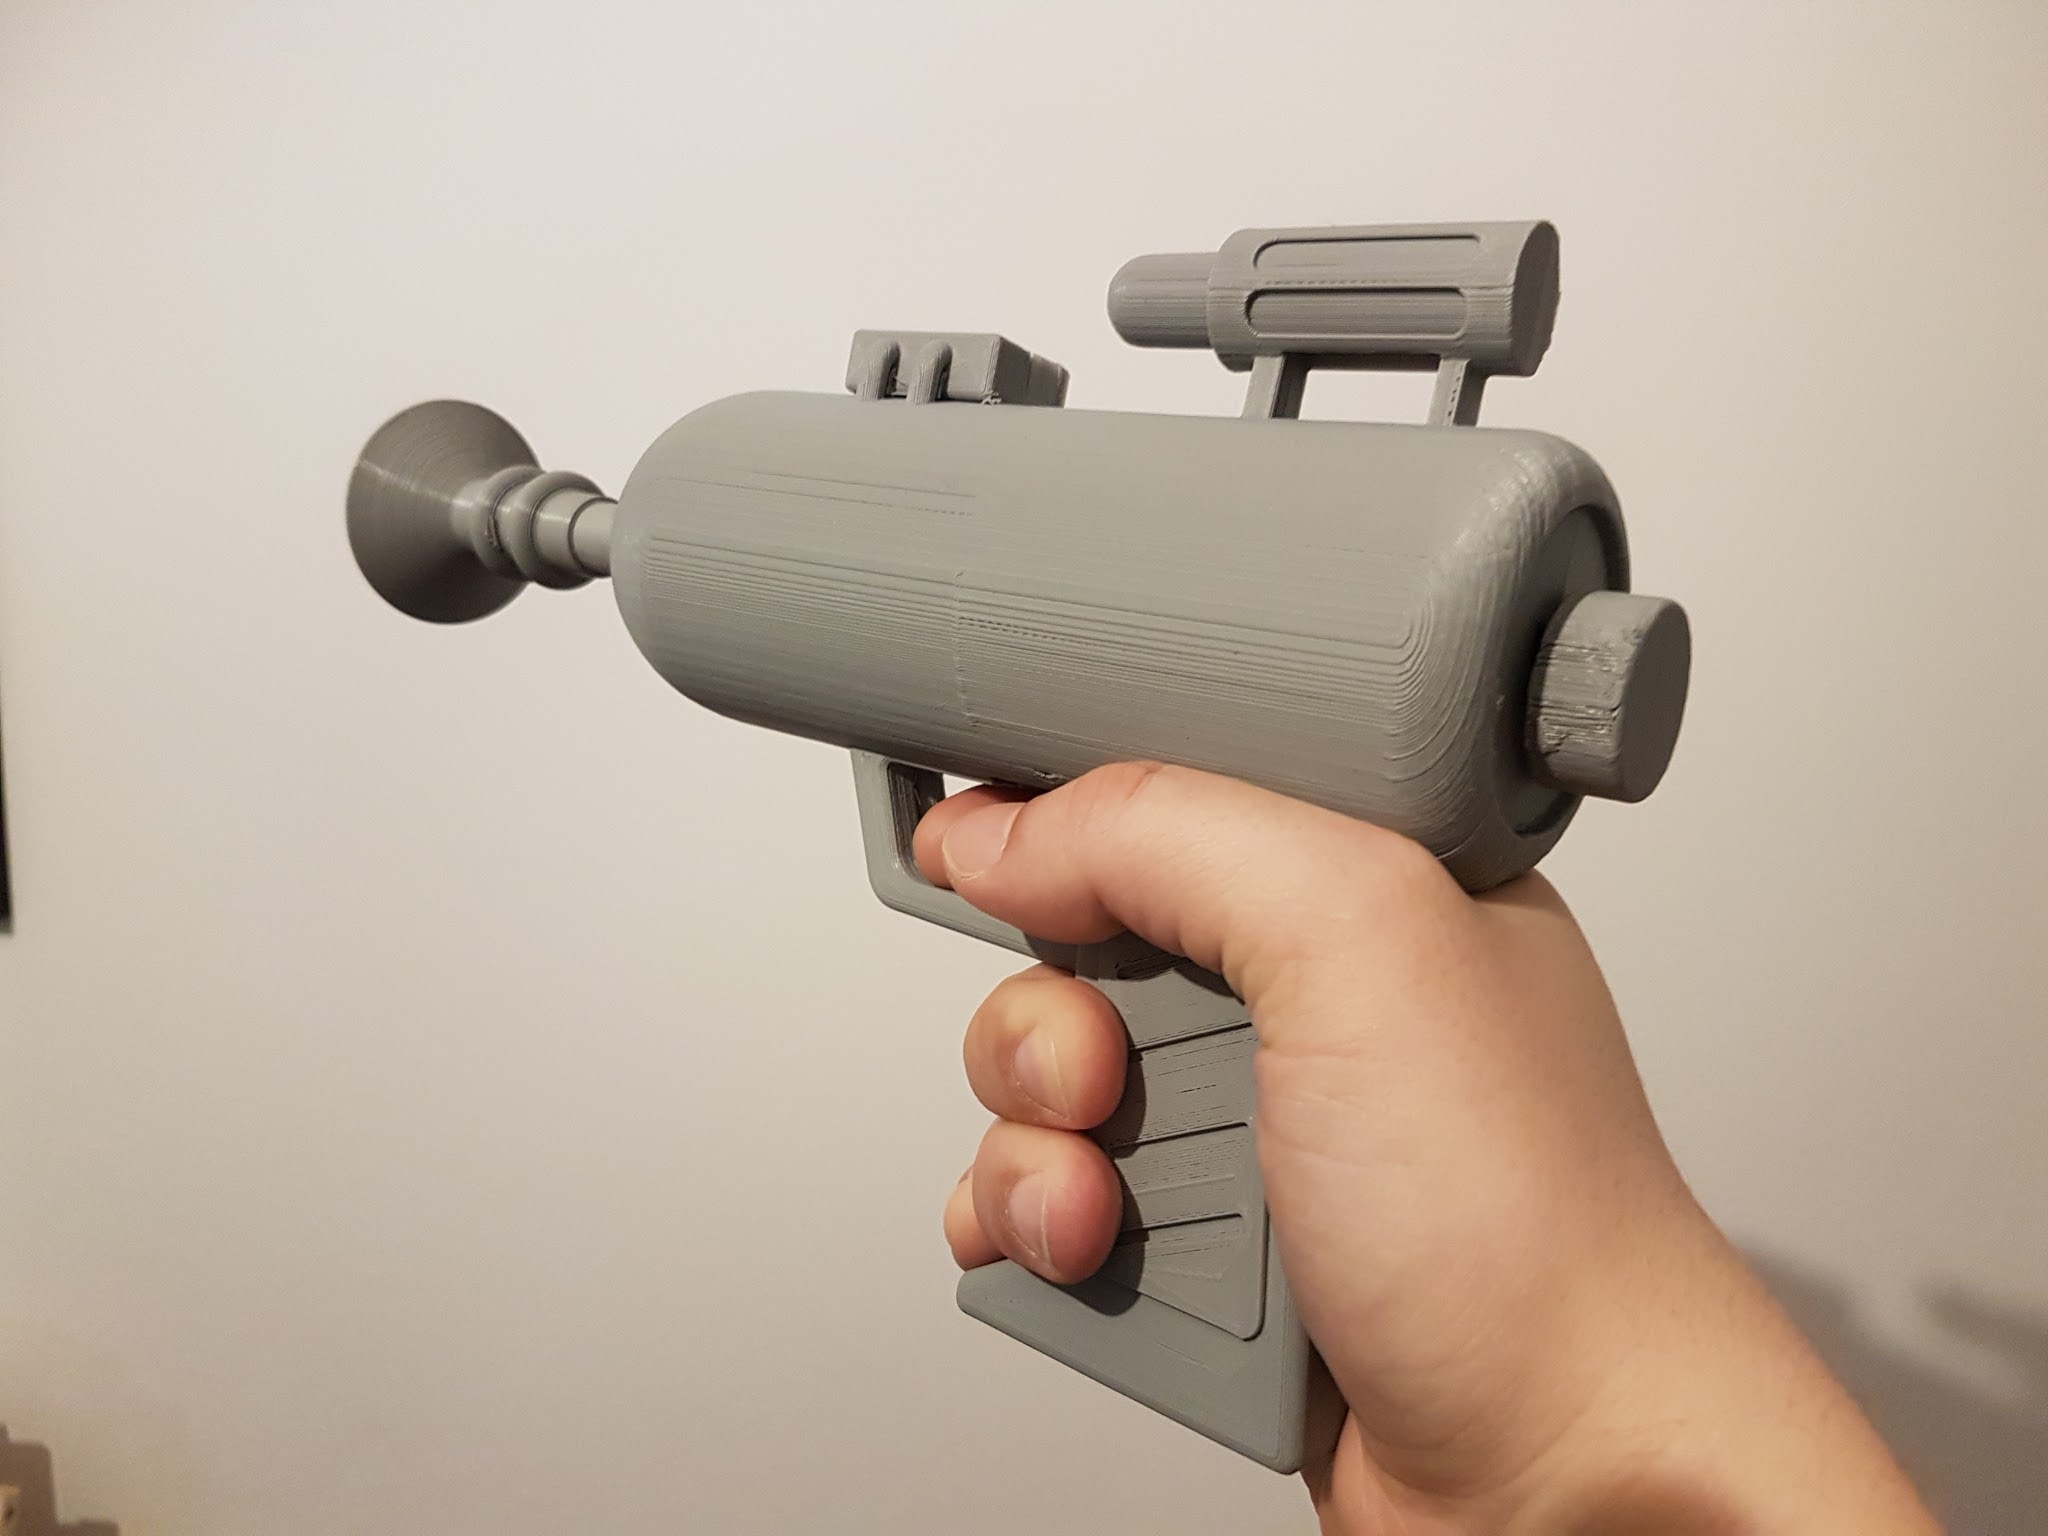 Rick and Morty's laser gun - functional, shoots NERF darts